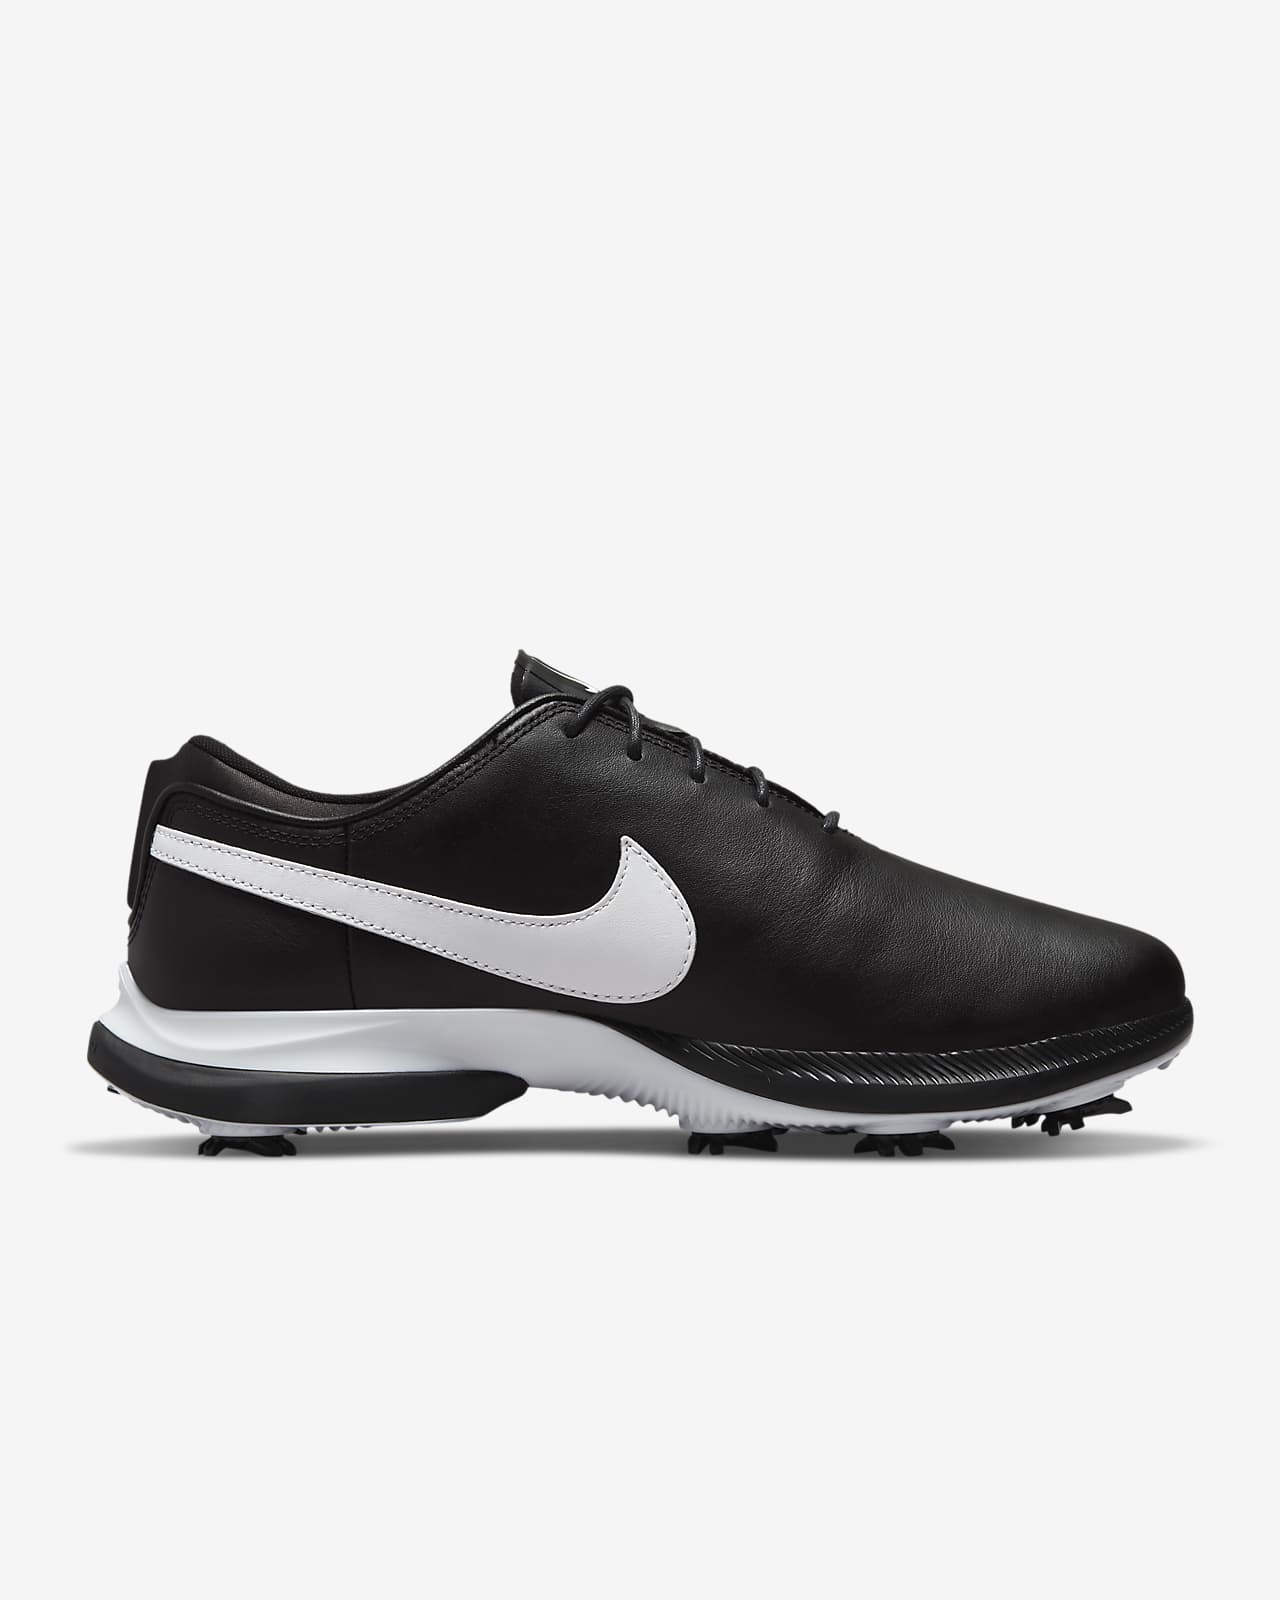 nike golf shoes victory tour 2